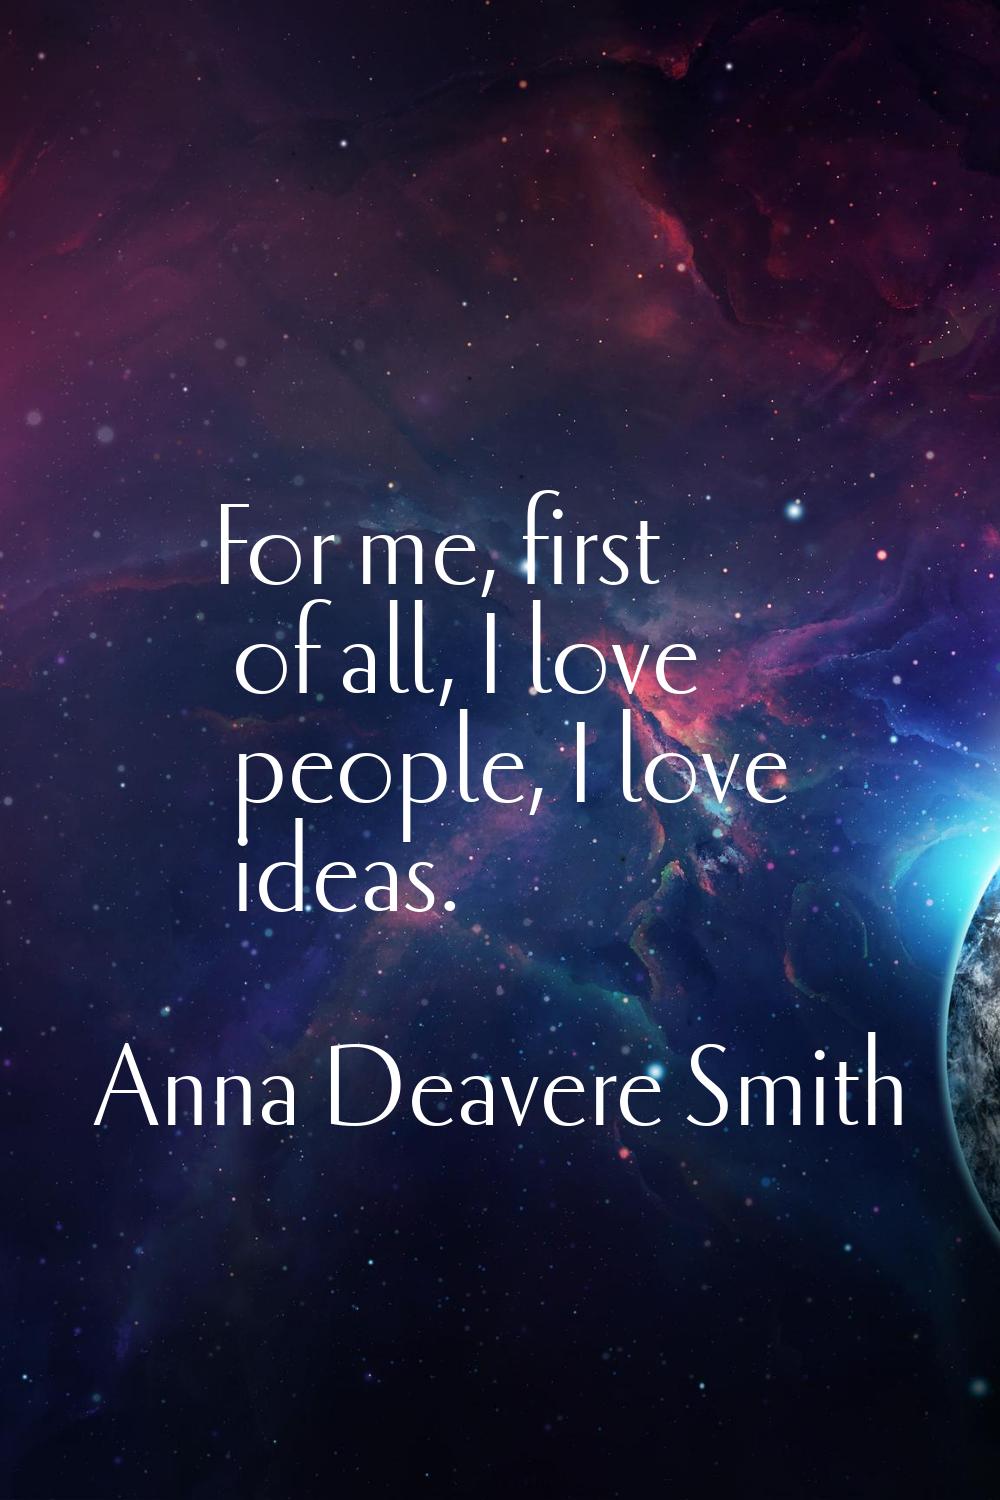 For me, first of all, I love people, I love ideas.